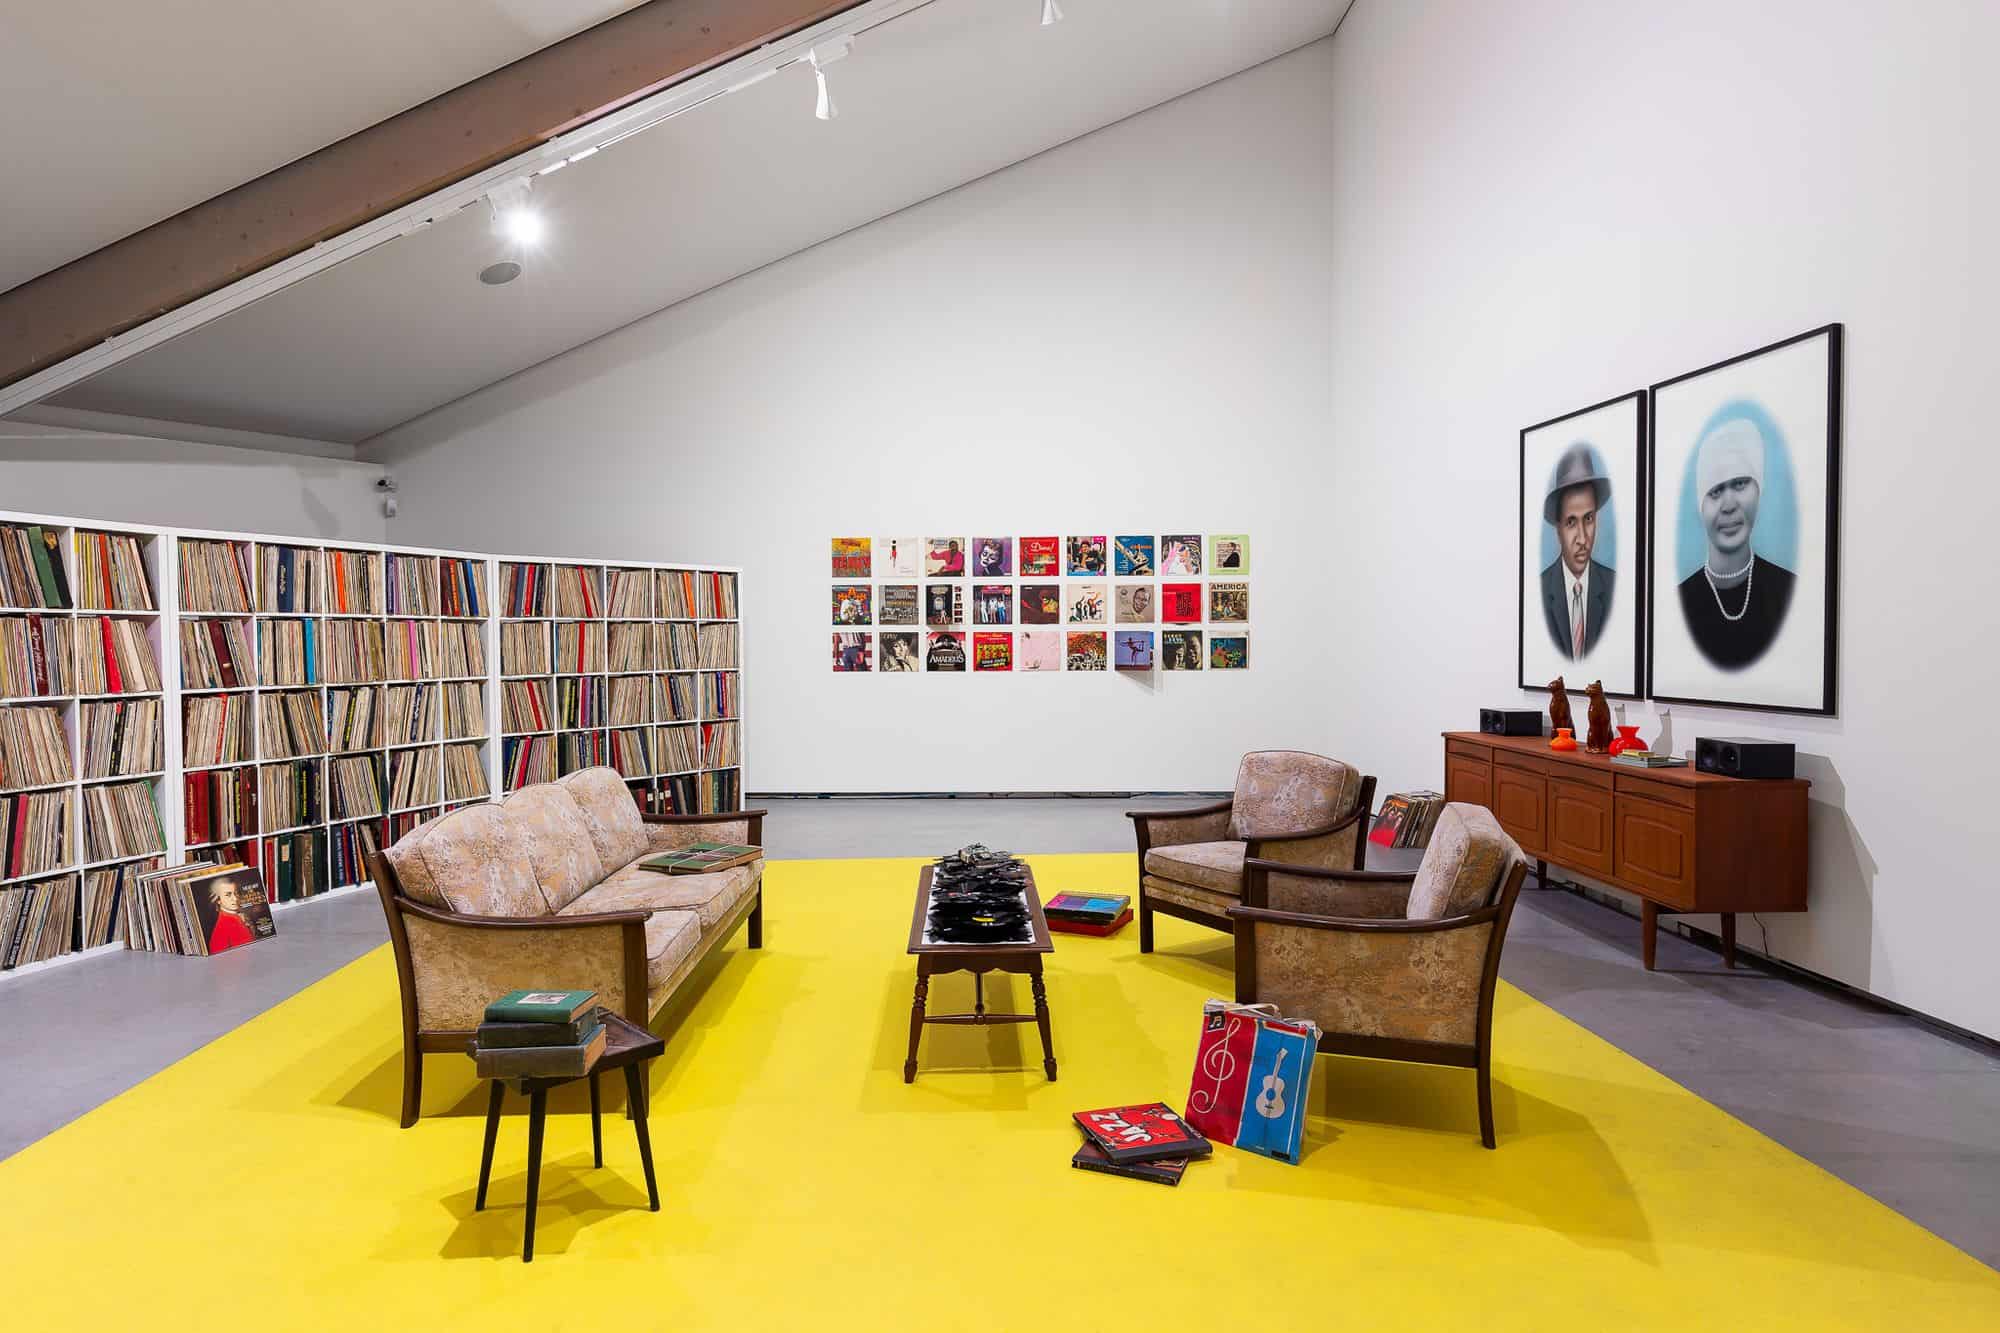 KAY HASSAN, “My Father’s music room,” 2007-2019. | Photo courtesy Astrup Fearnley Museum